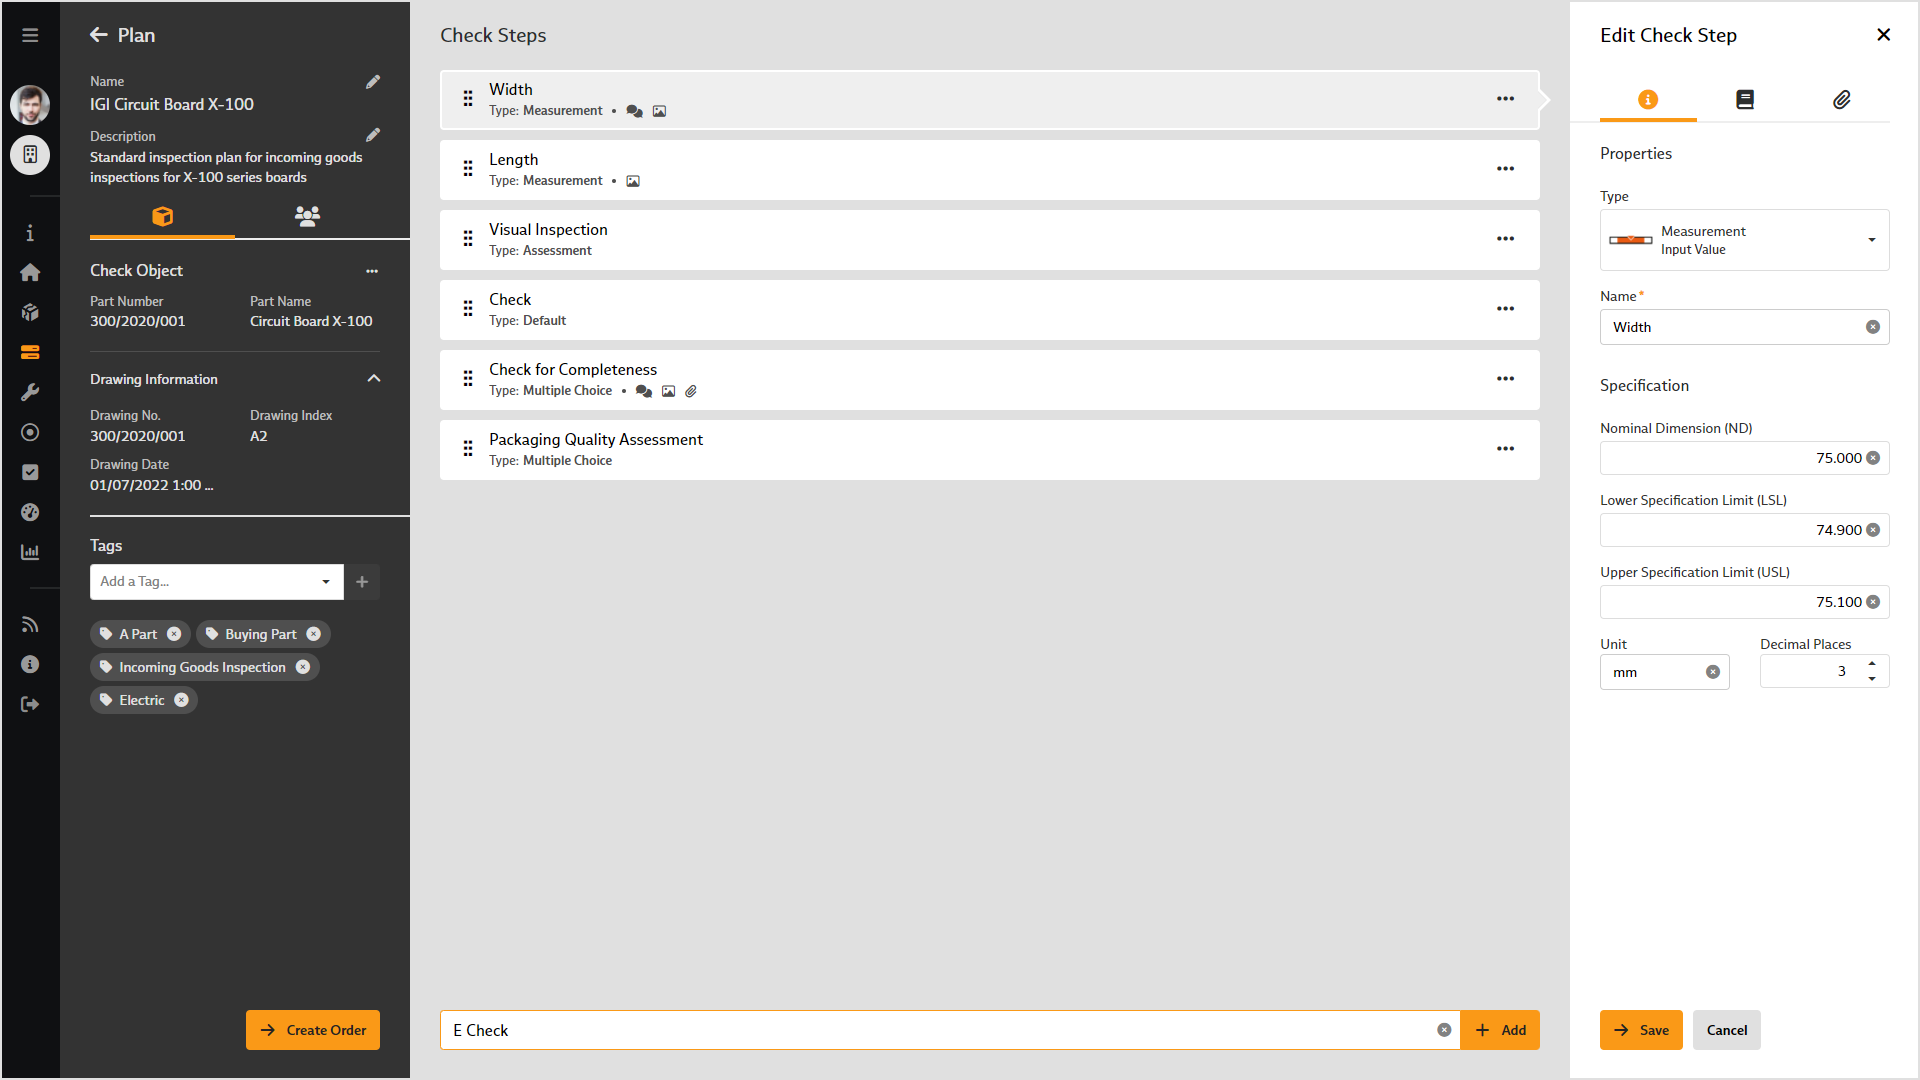 Screenshot of "Goods Inspections & Checklists" in the BabtecQube: Create inspection steps